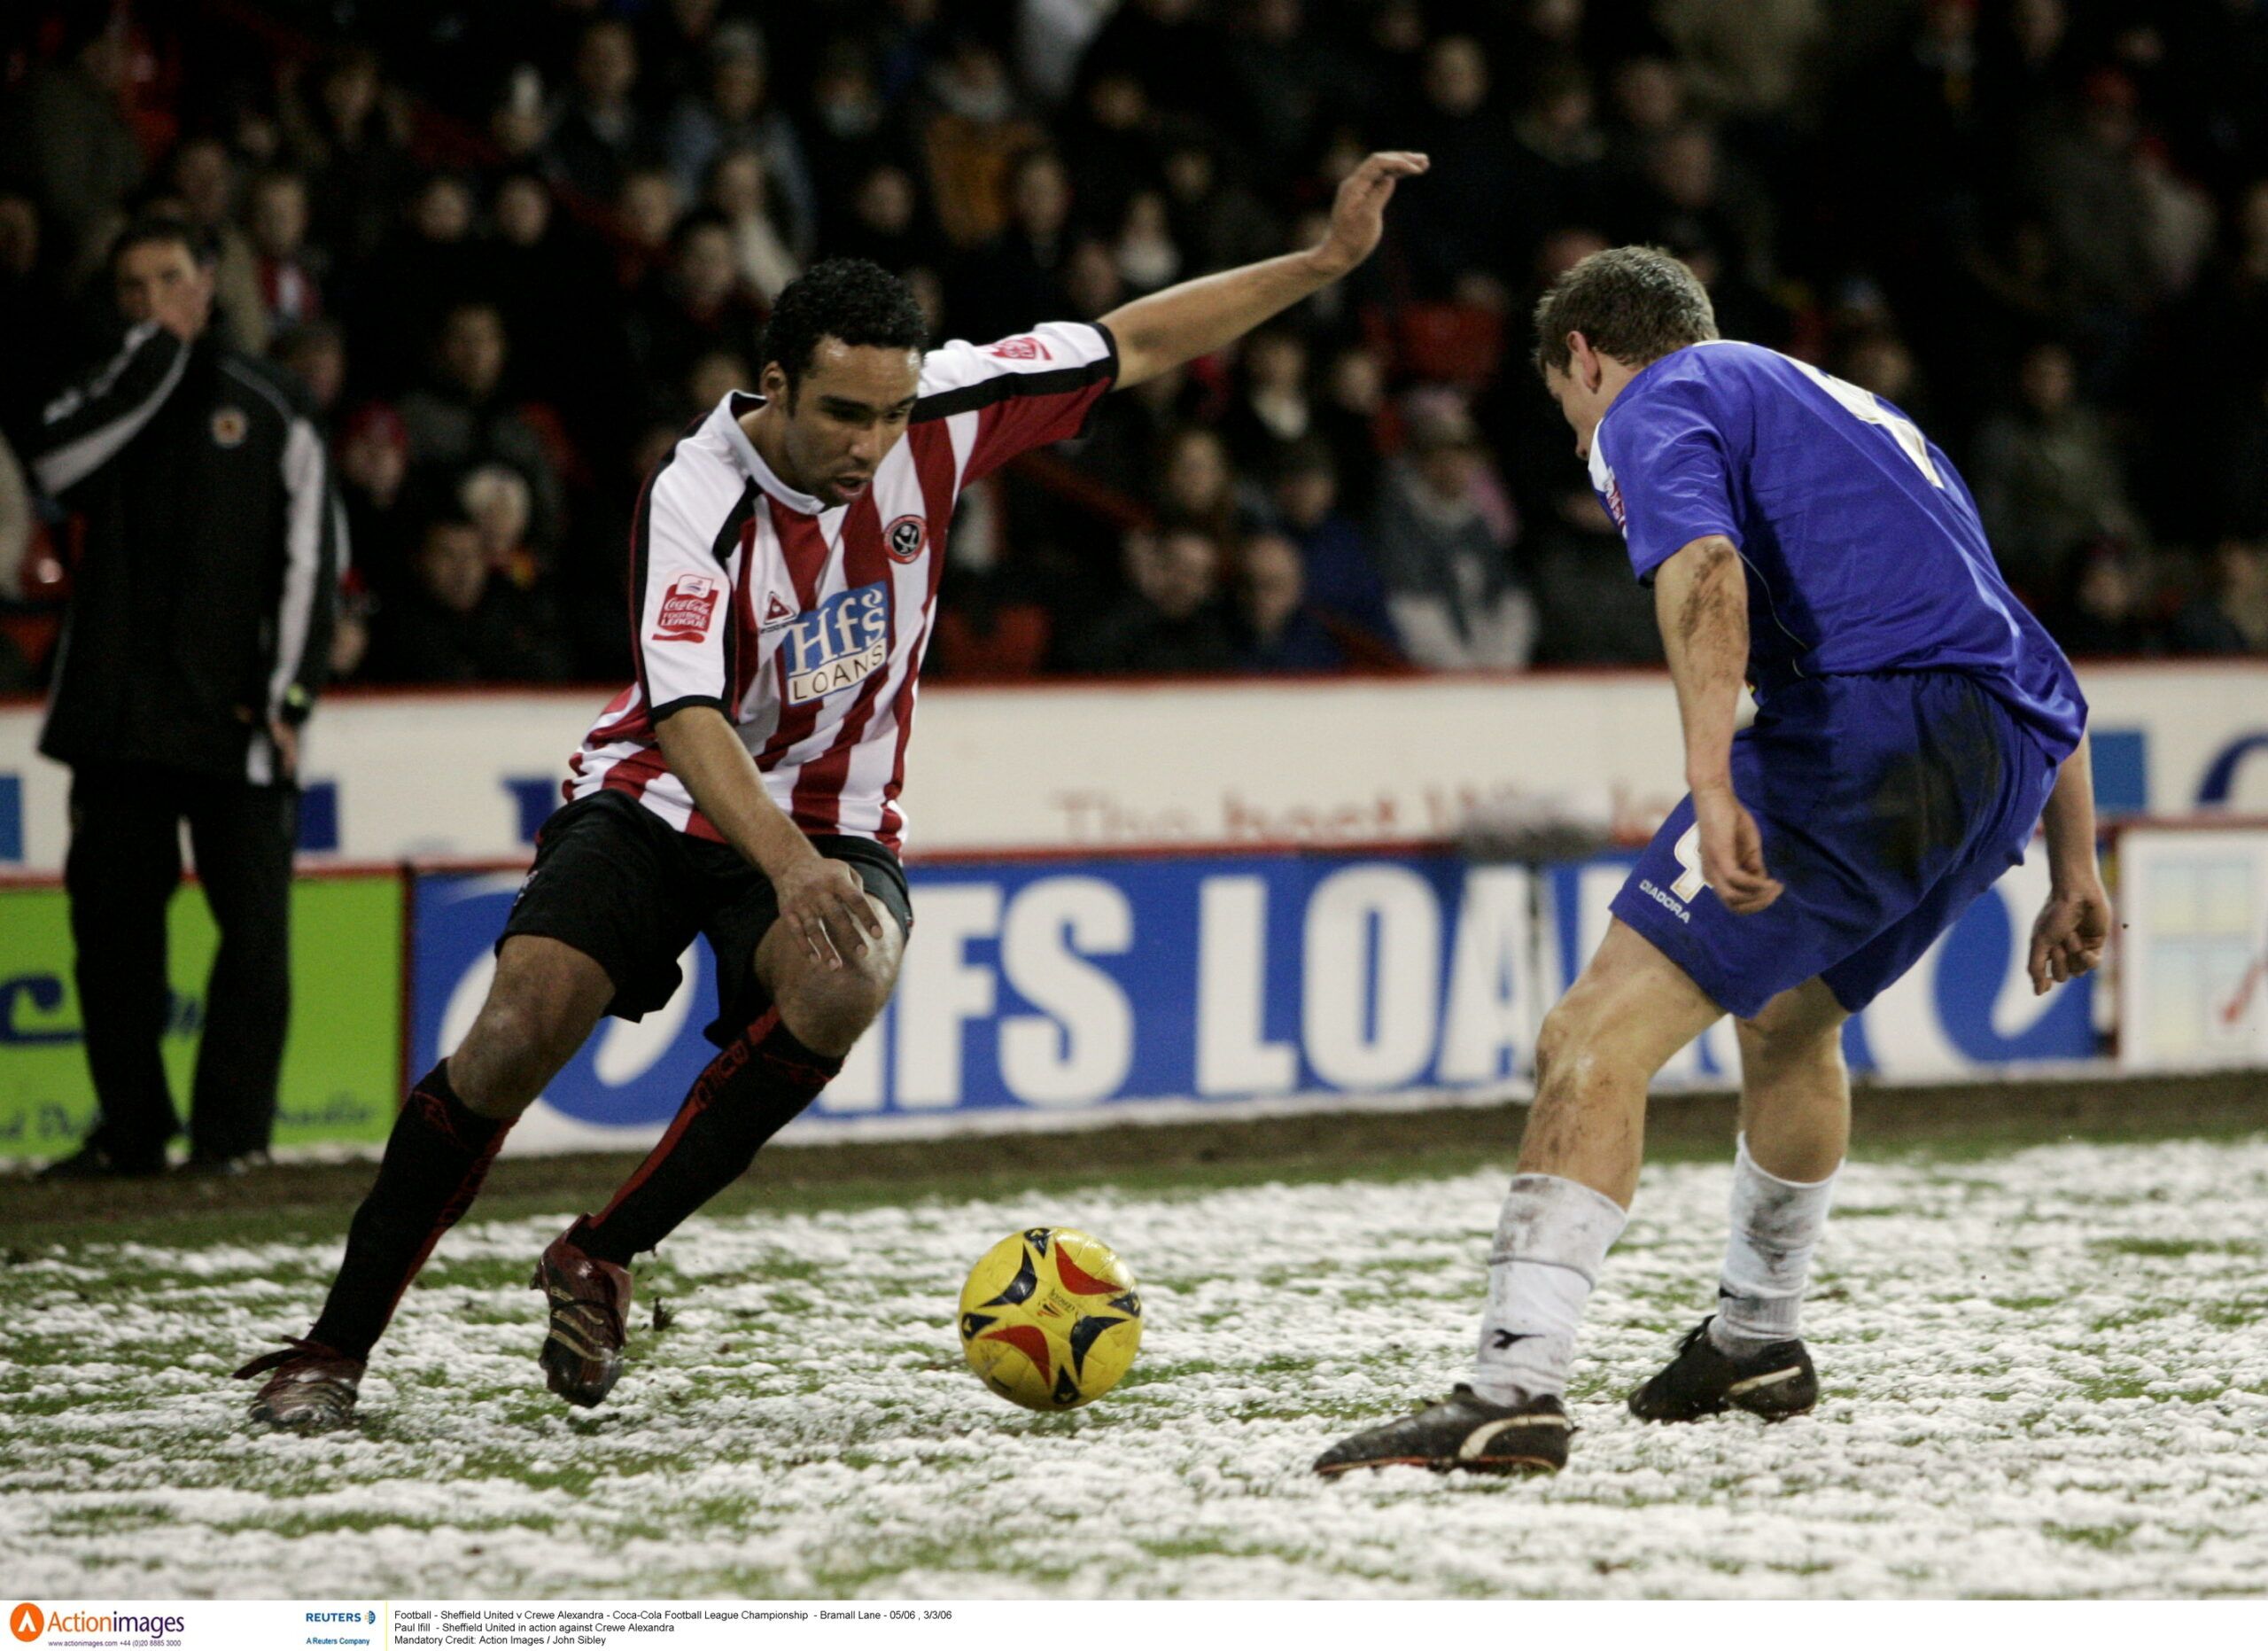 Football - Sheffield United v Crewe Alexandra - Coca-Cola Football League Championship  - Bramall Lane - 05/06 , 3/3/06 
Paul Ifill  - Sheffield United in action against Crewe Alexandra 
Mandatory Credit: Action Images / John Sibley